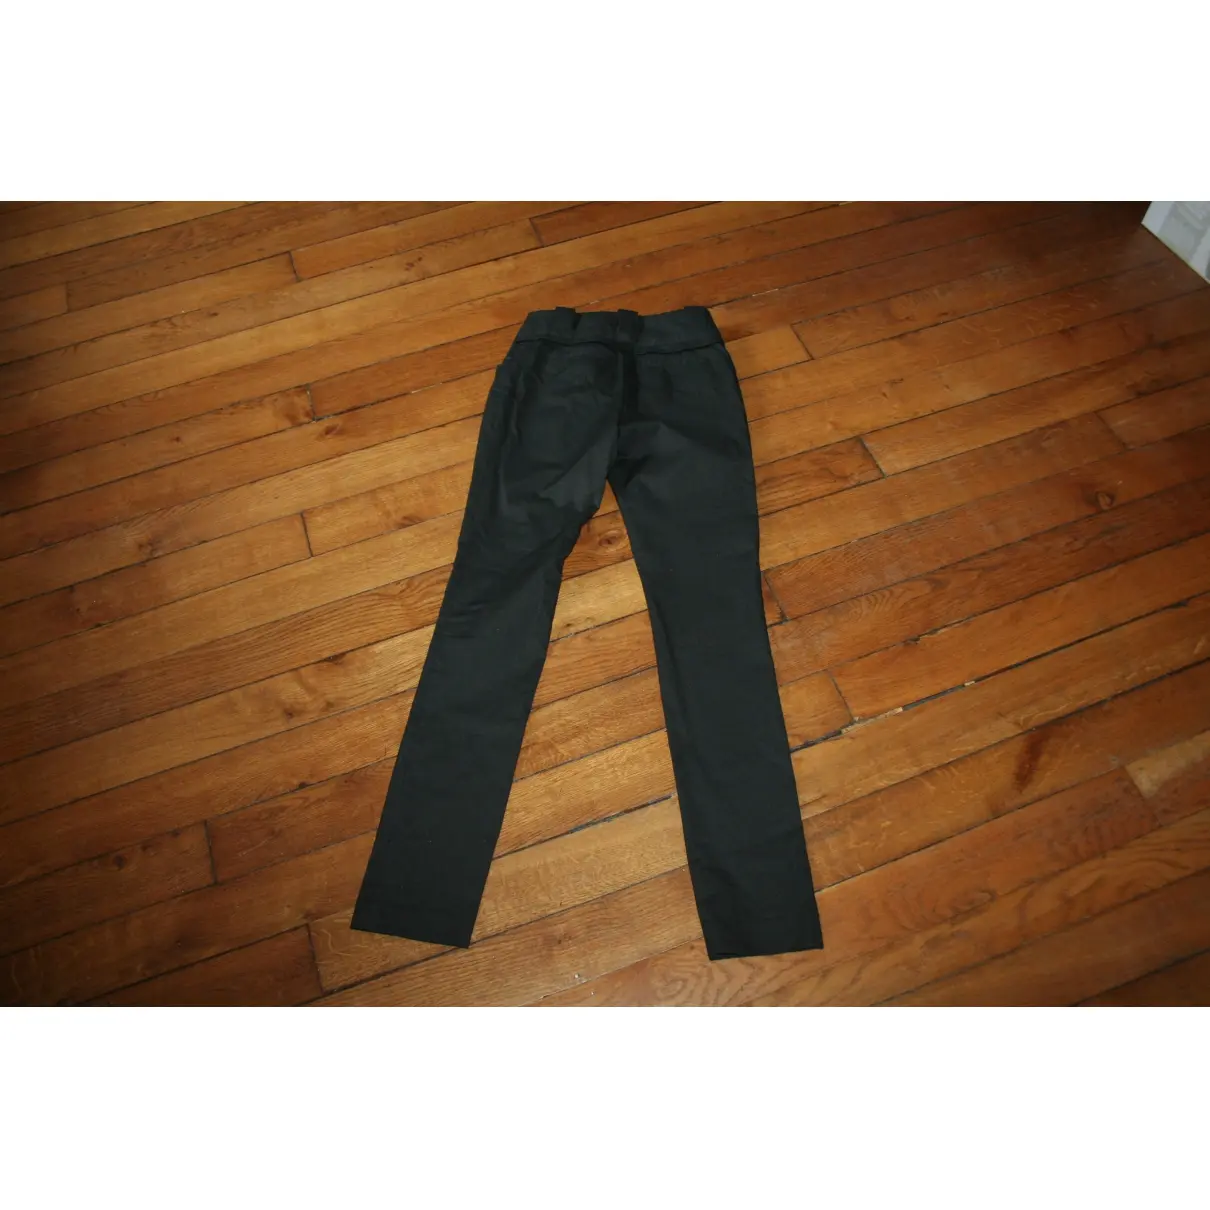 Reiss Straight pants for sale